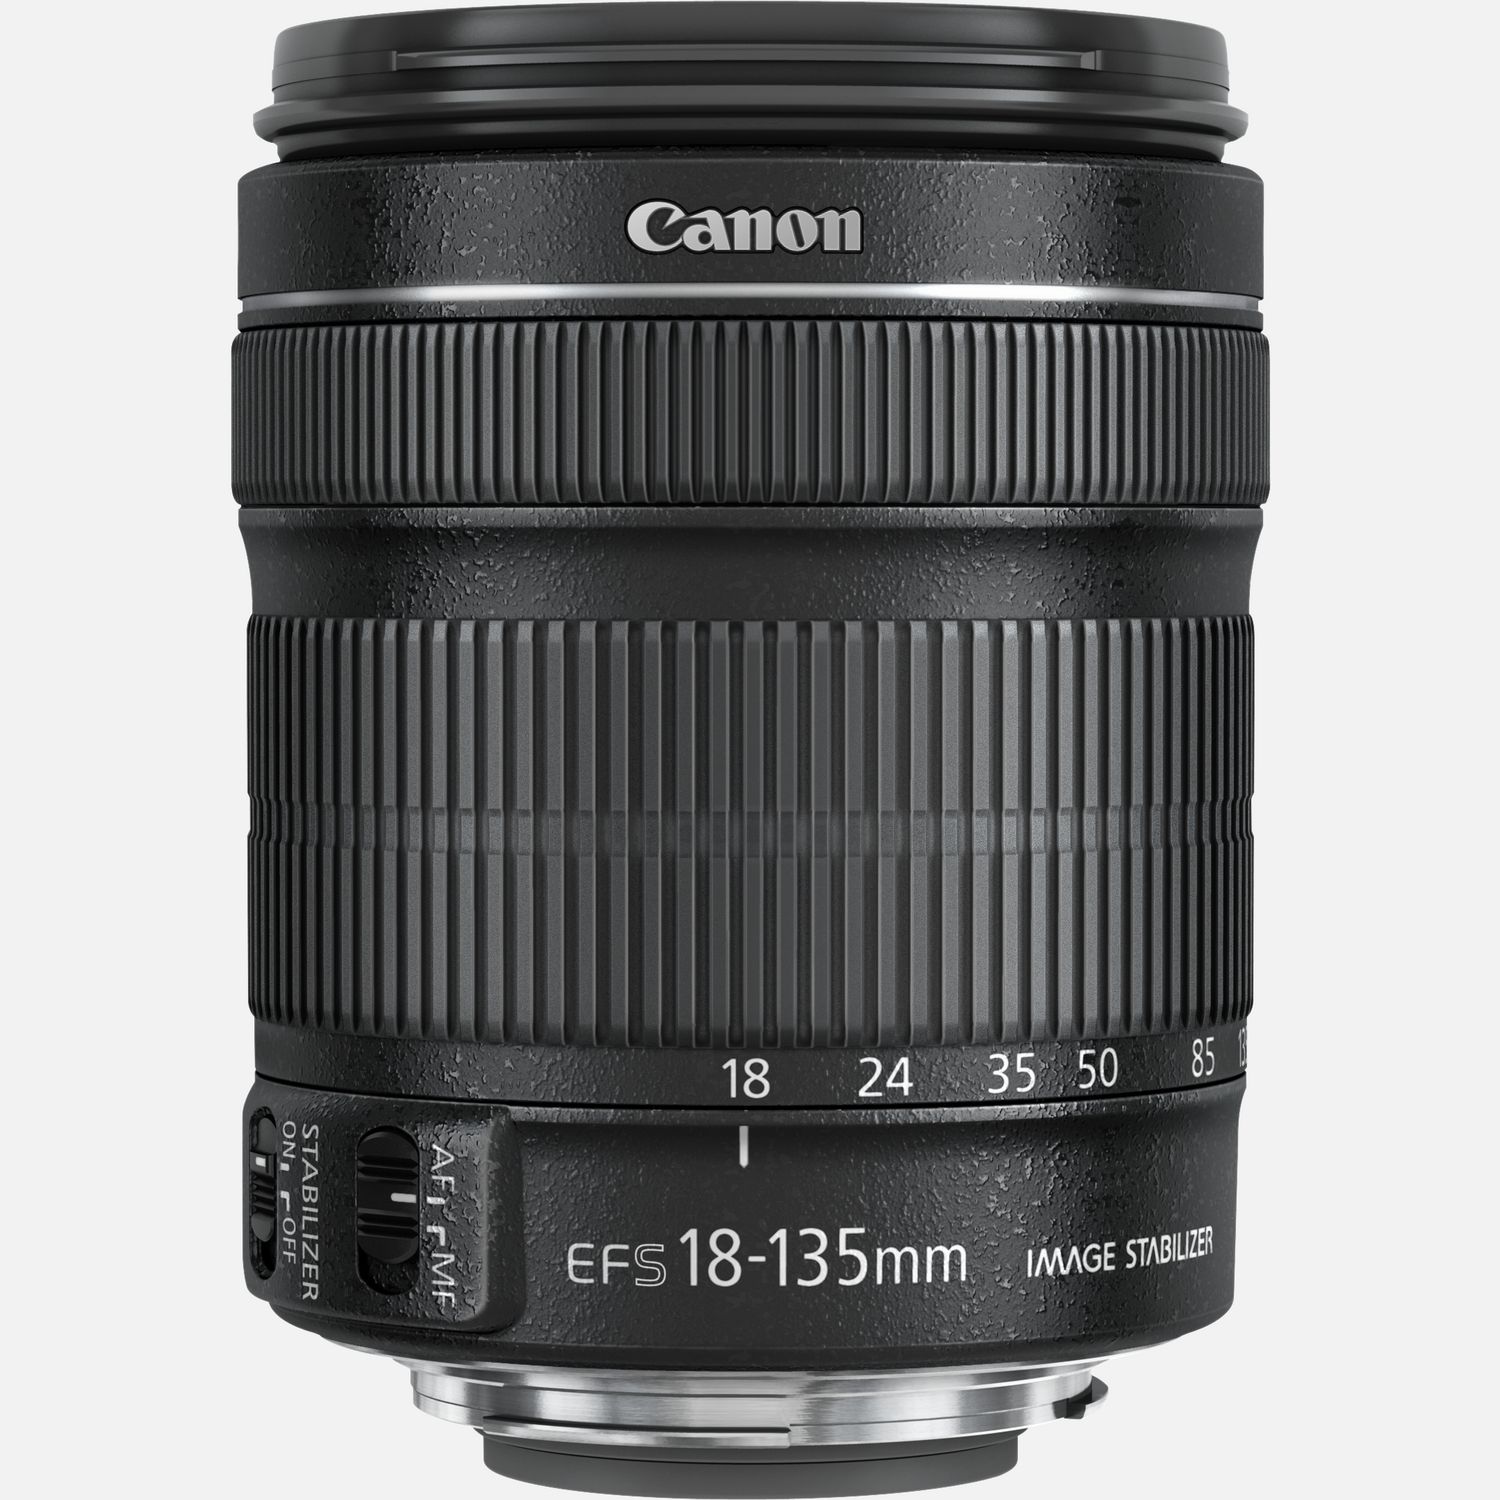 Buy Canon EF-S 18-135mm f/3.5-5.6 IS STM Lens in Discontinued